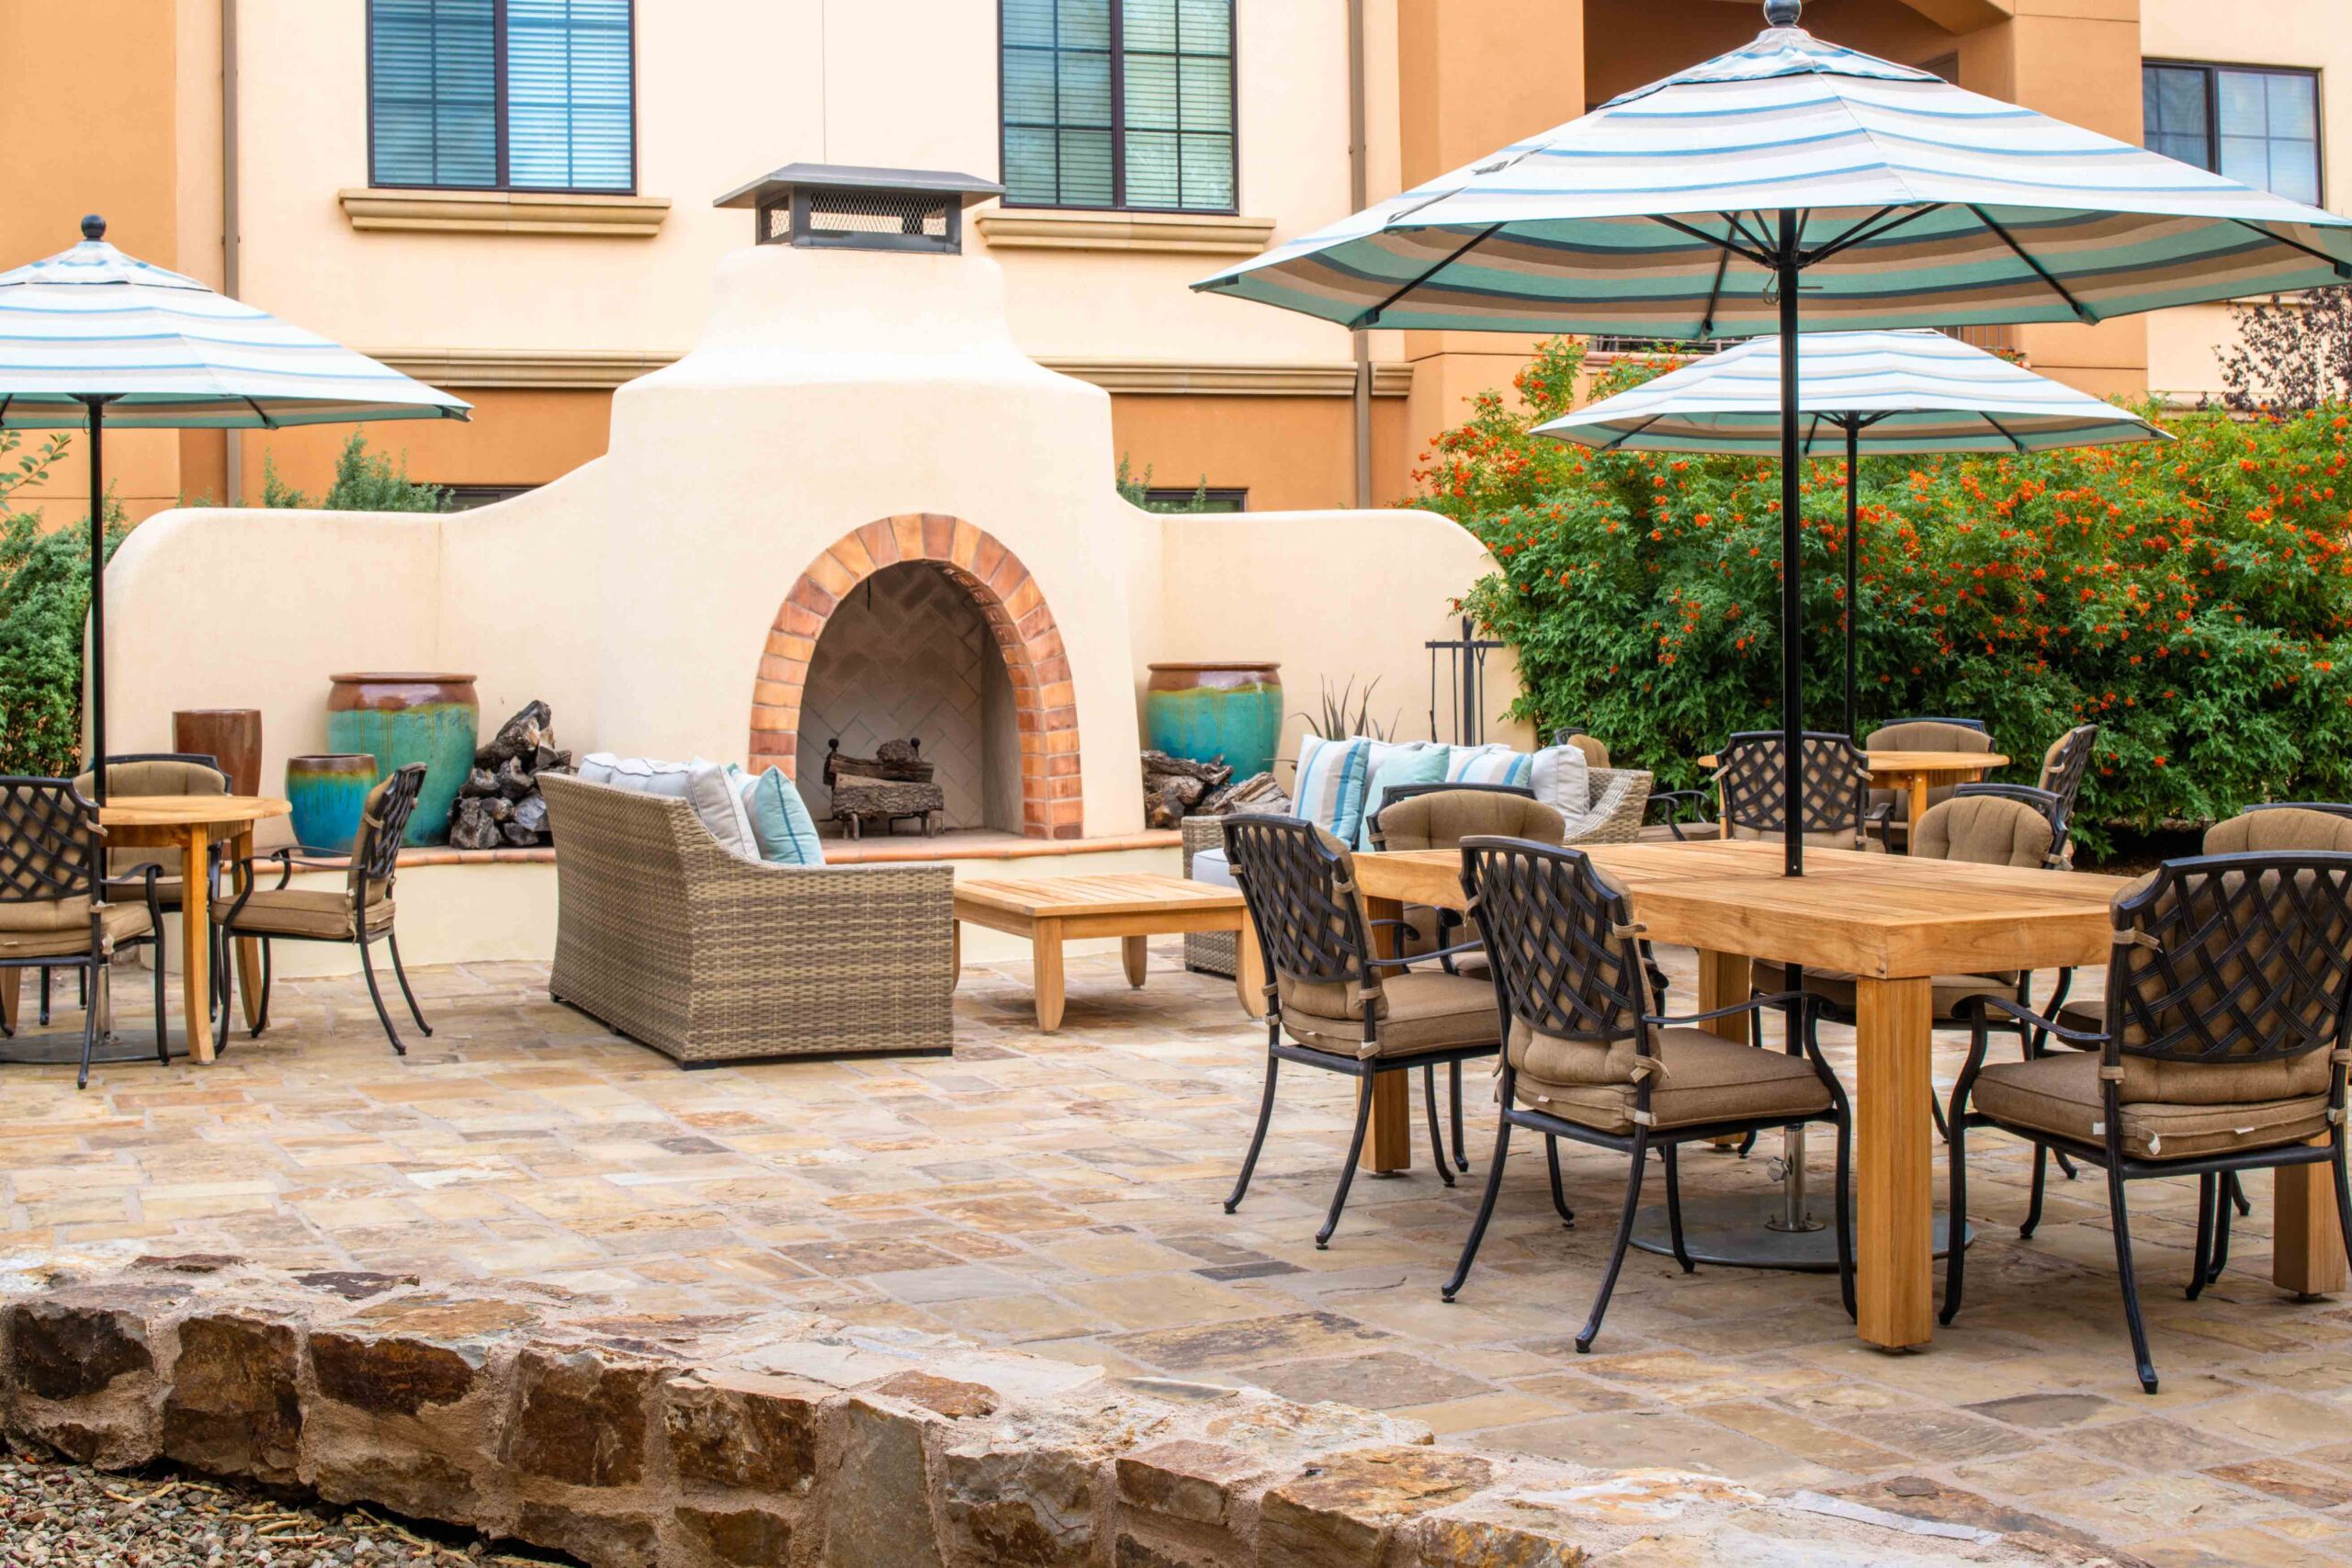 maravilla outdoor patio and fireplace and table with umbrella